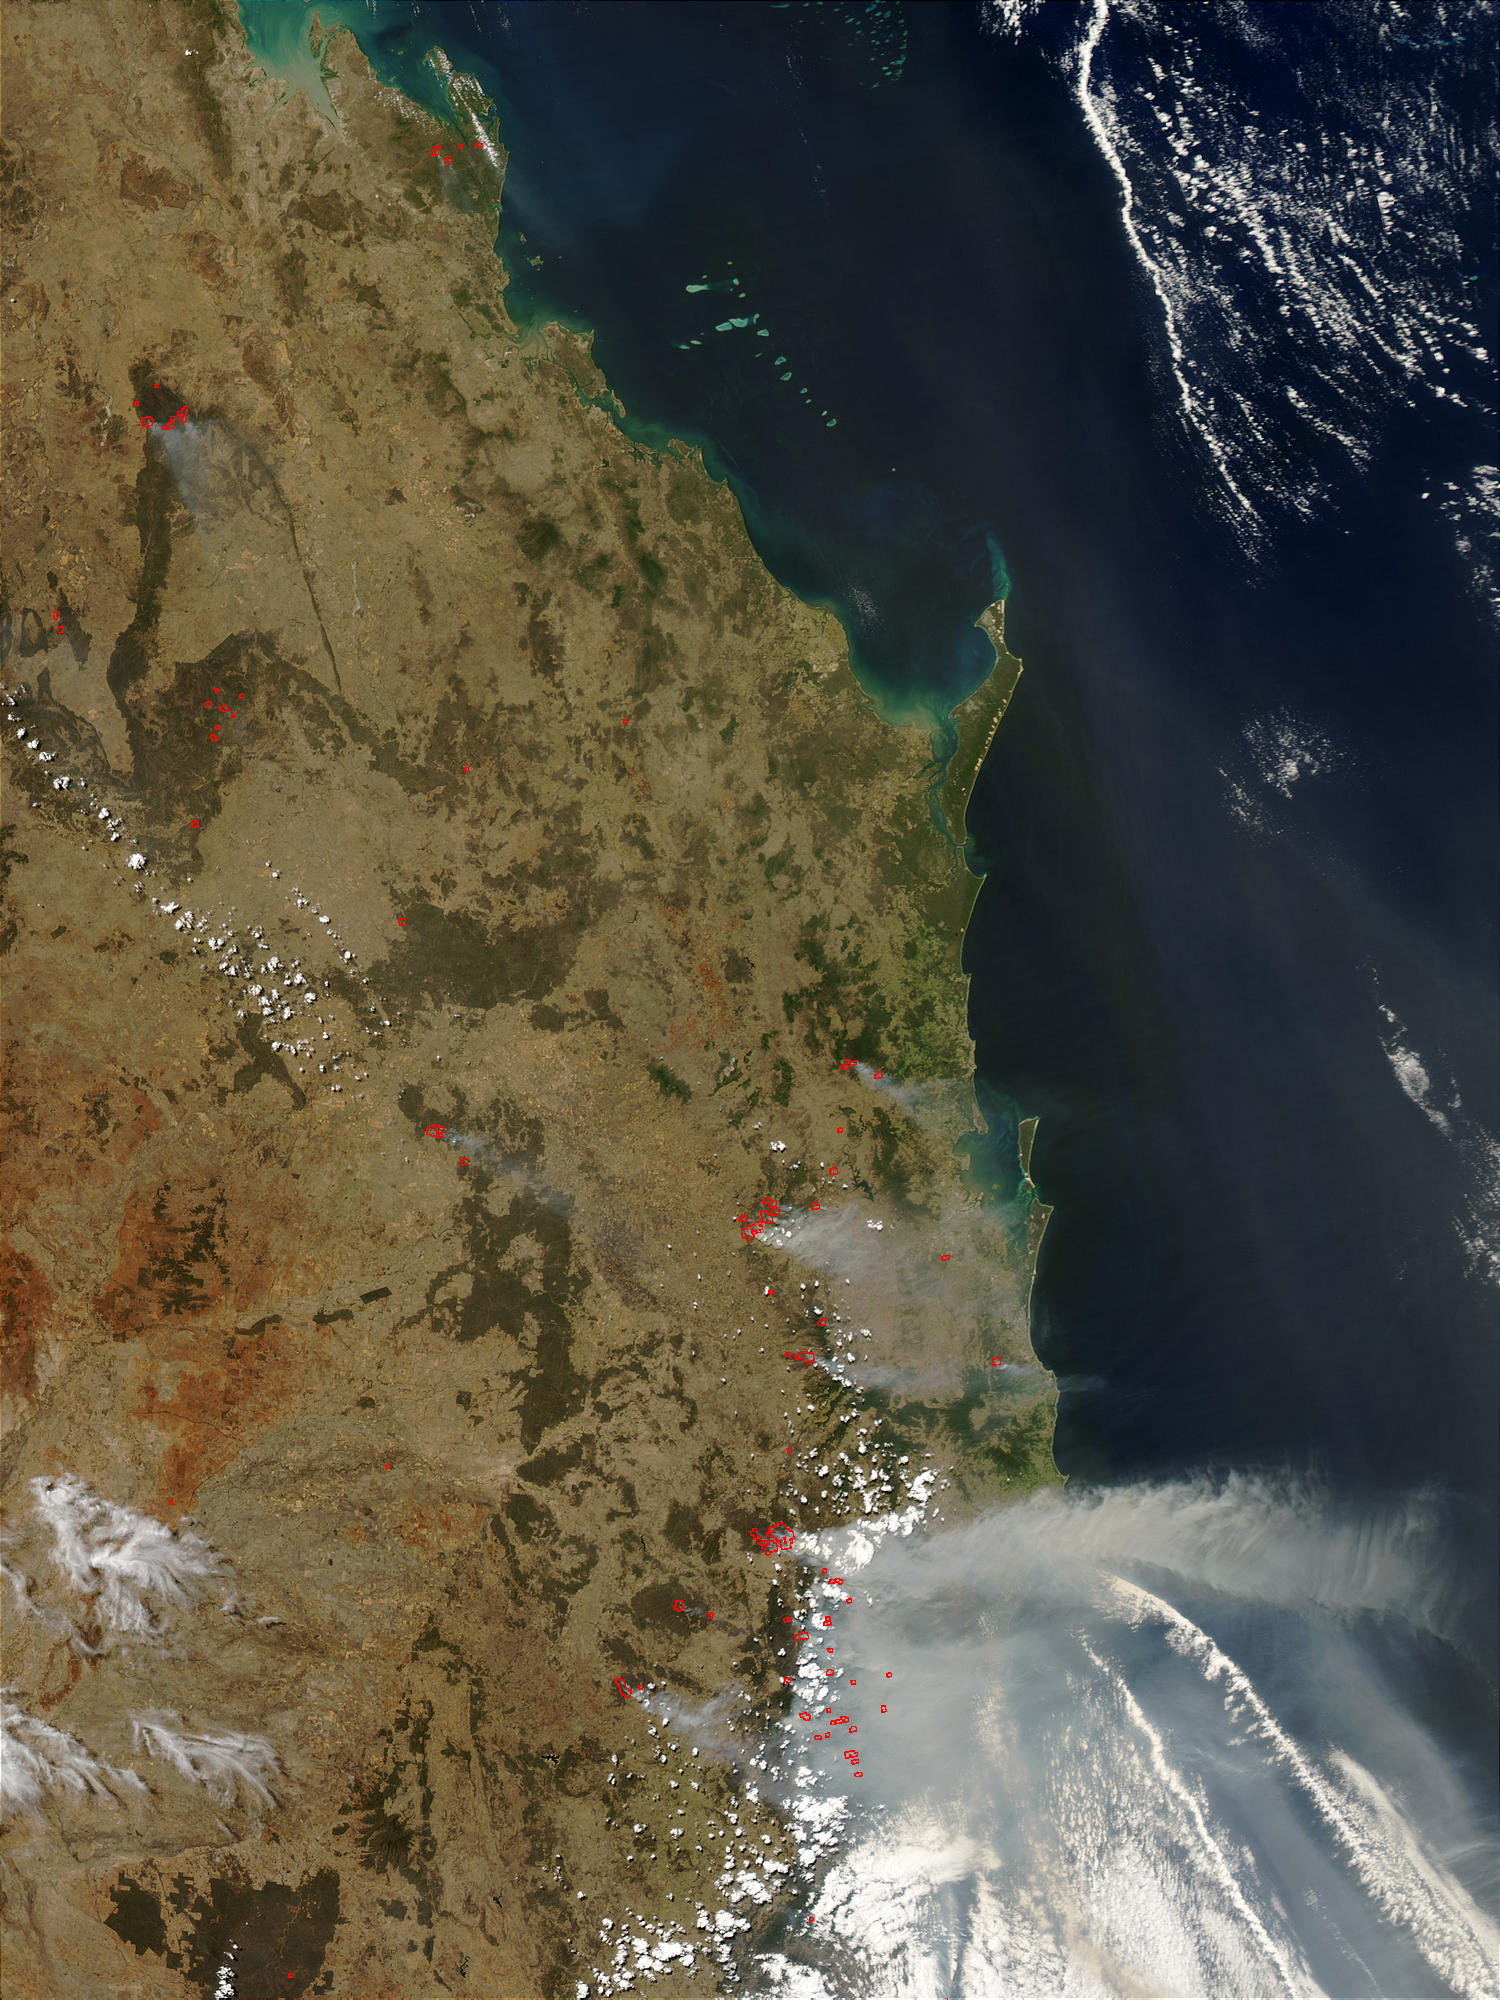 Fires and smoke in New South Wales, Australia - related image preview